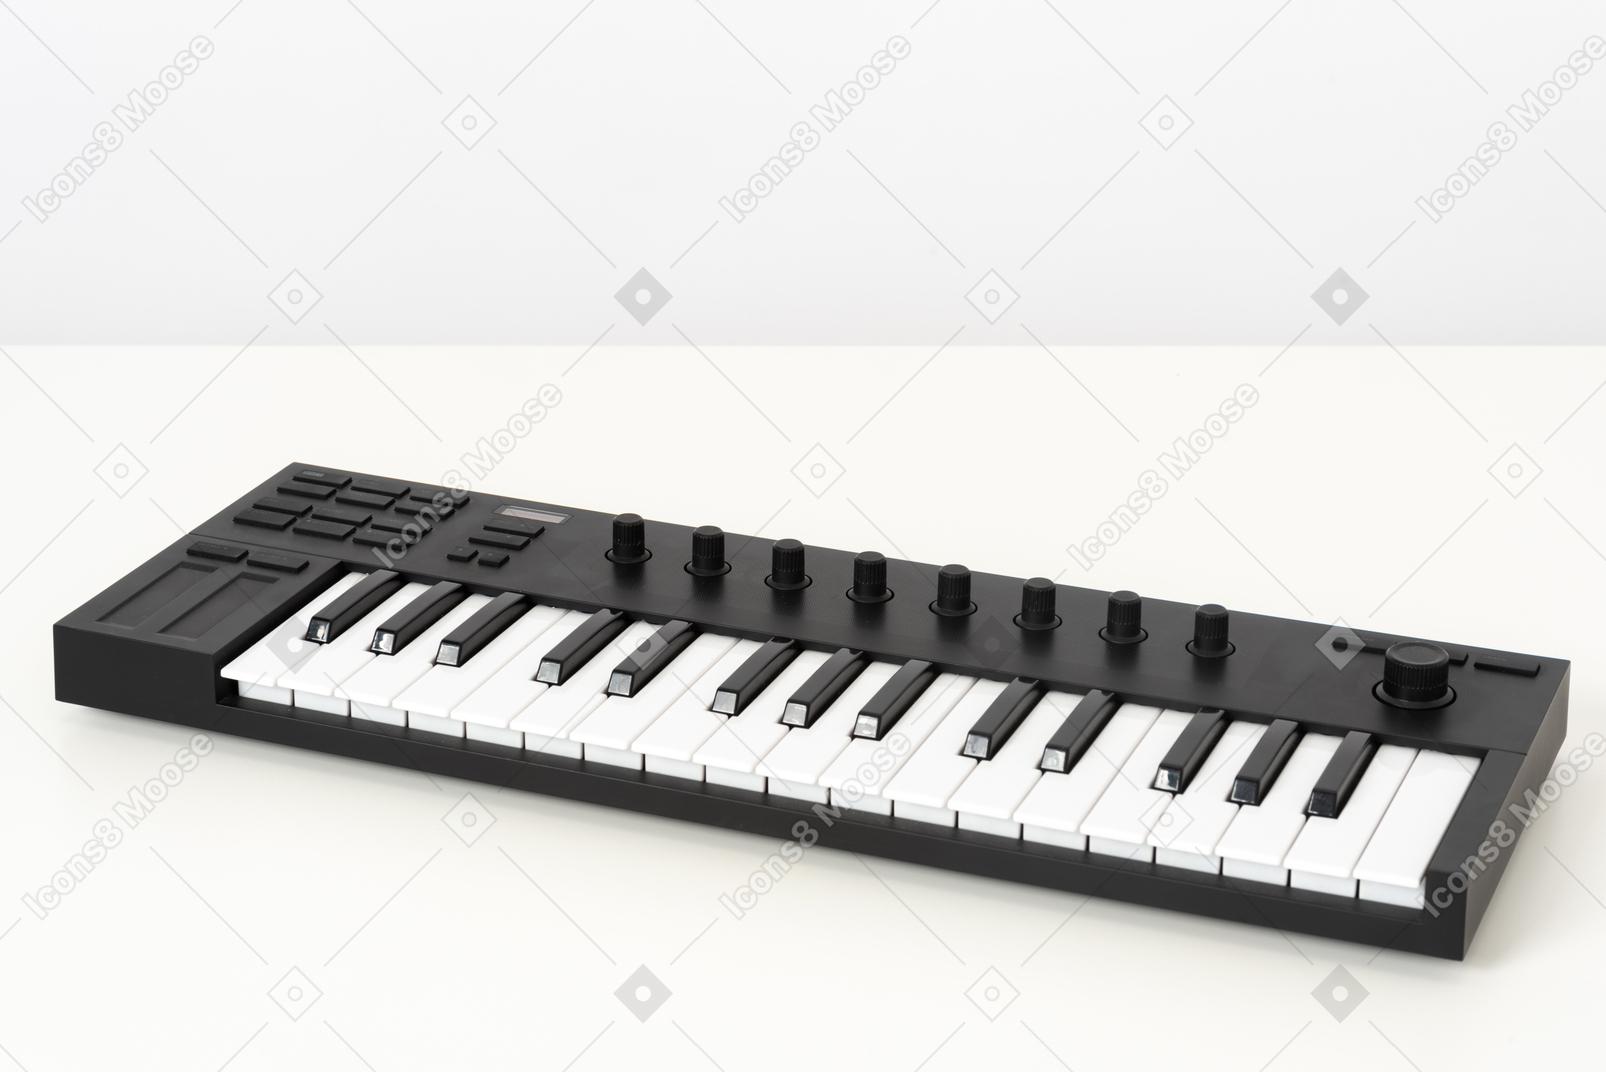 Musical keyboard on a white background